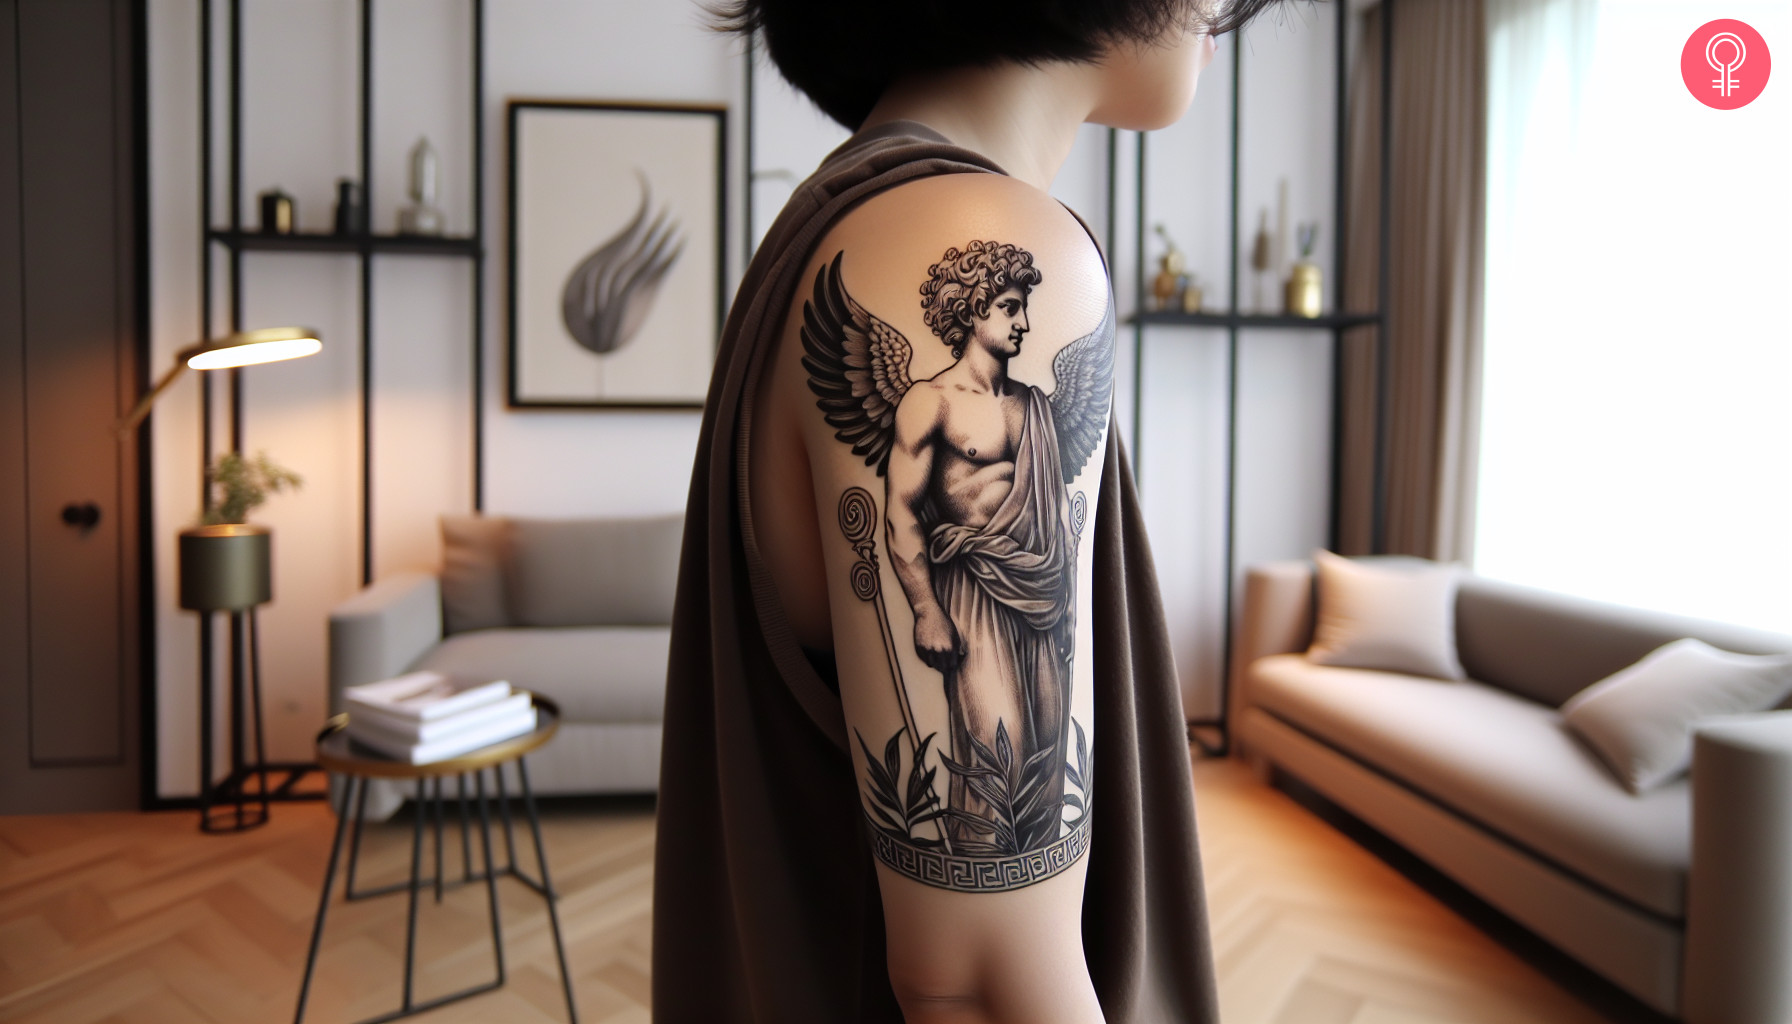 A portrait hermes greek god tattoo on the outer arm 